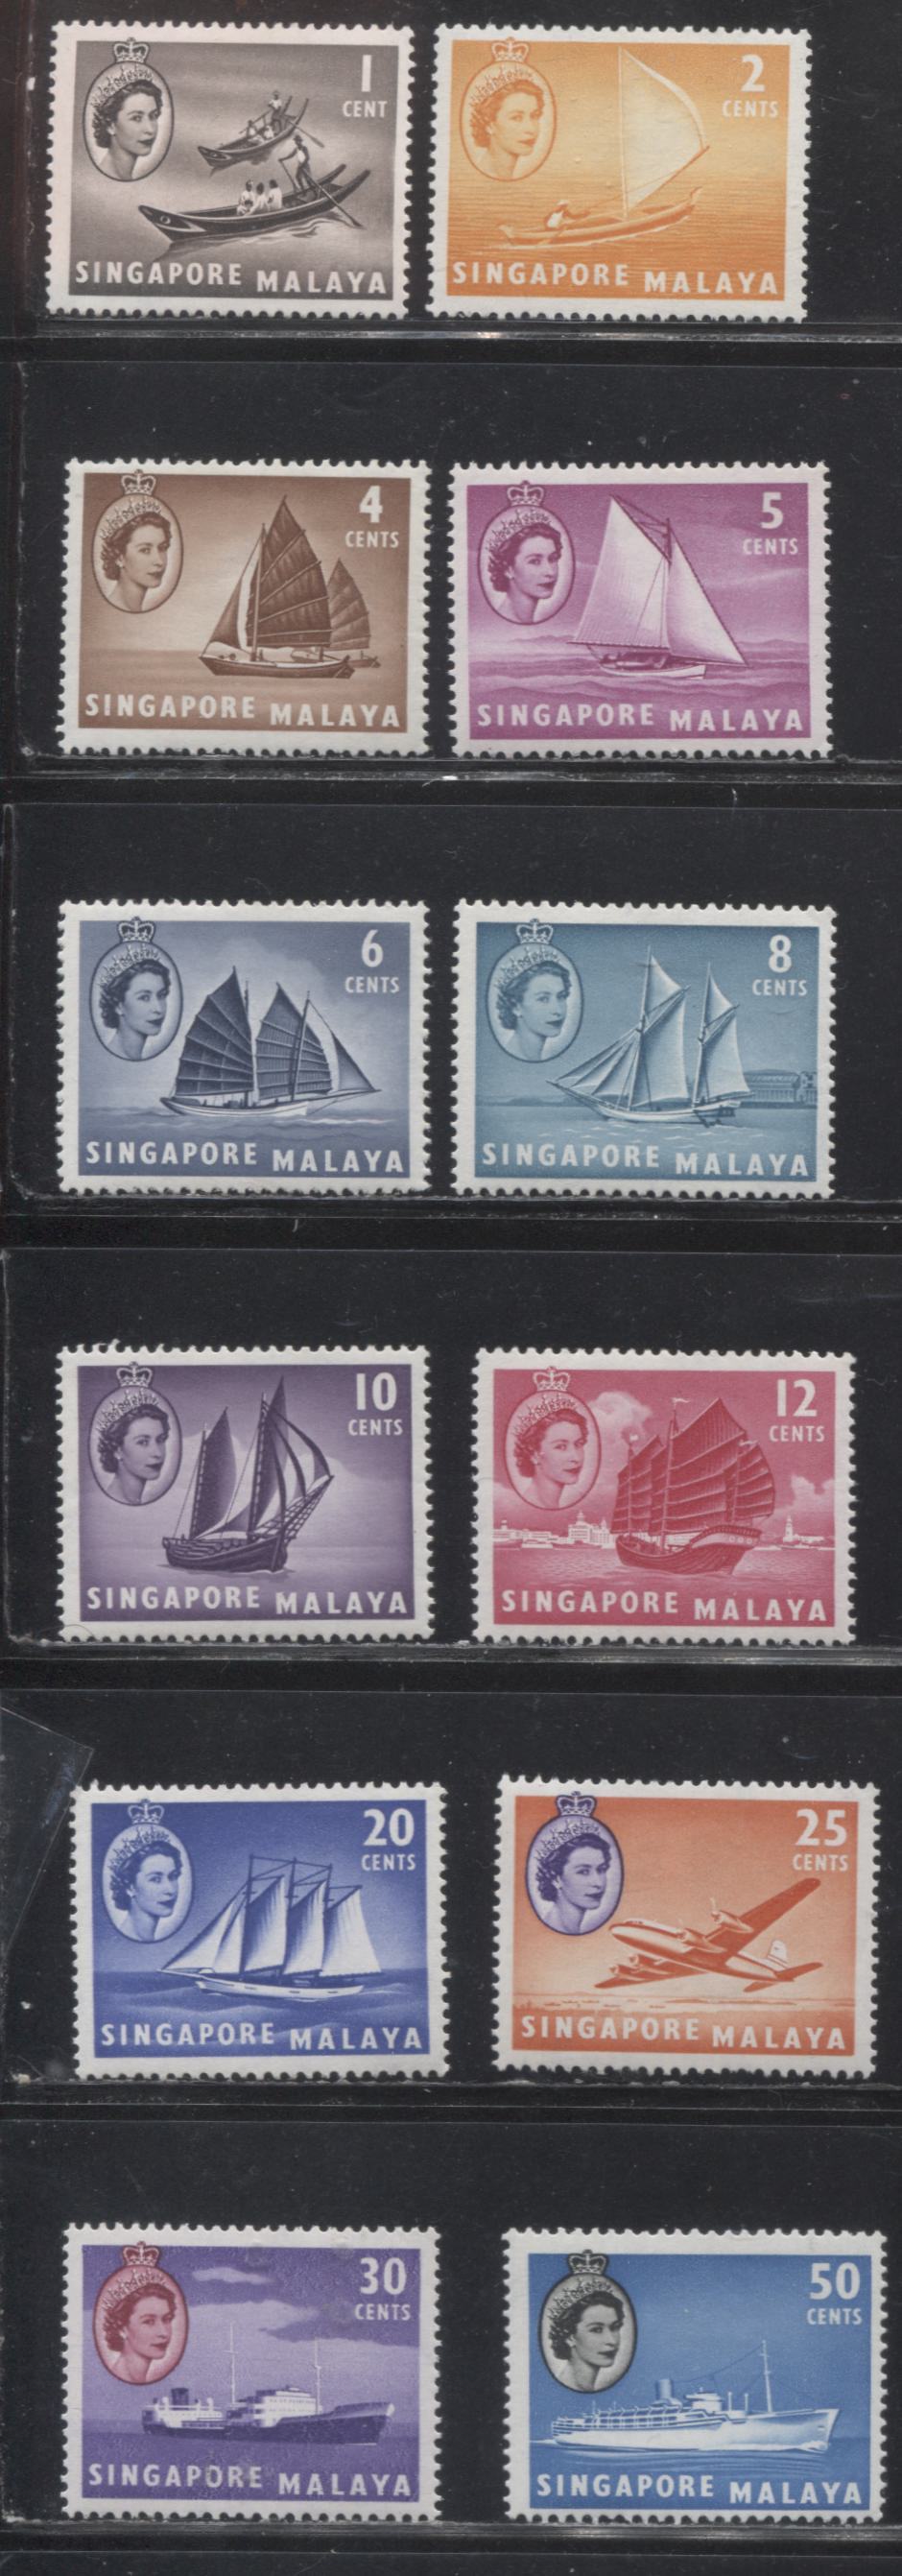 Lot 298 Singapore SG#38-49 1c - 50c, 1955-1959 Harrison Pictorial Definitive Issue, a Mostly VFNH Short Set on DF Paper